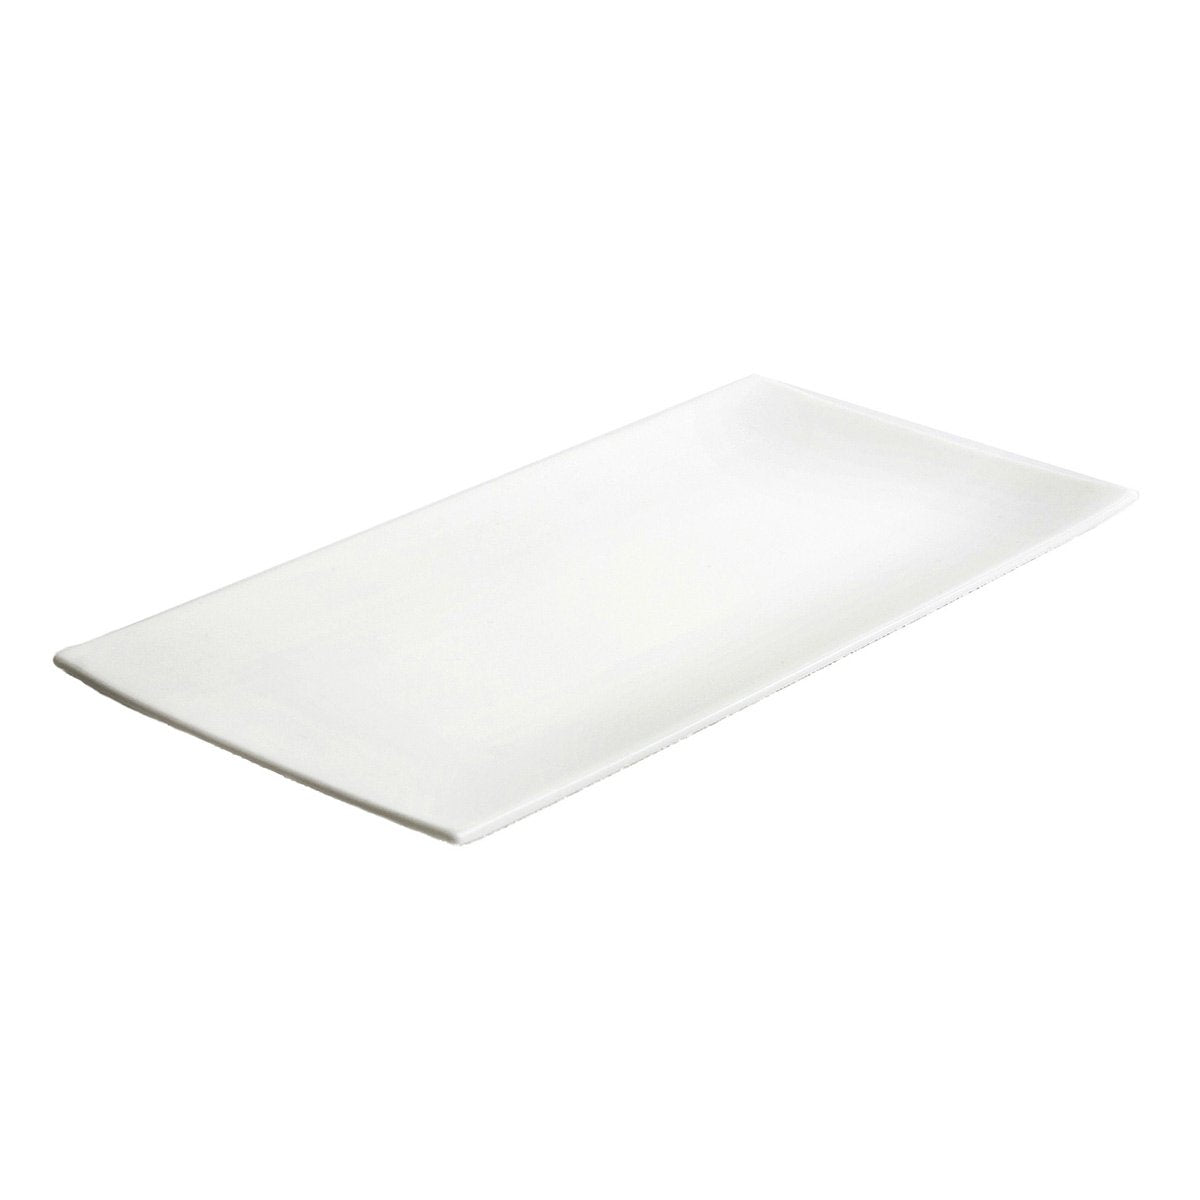 A Table Rectangular Occasion Plate